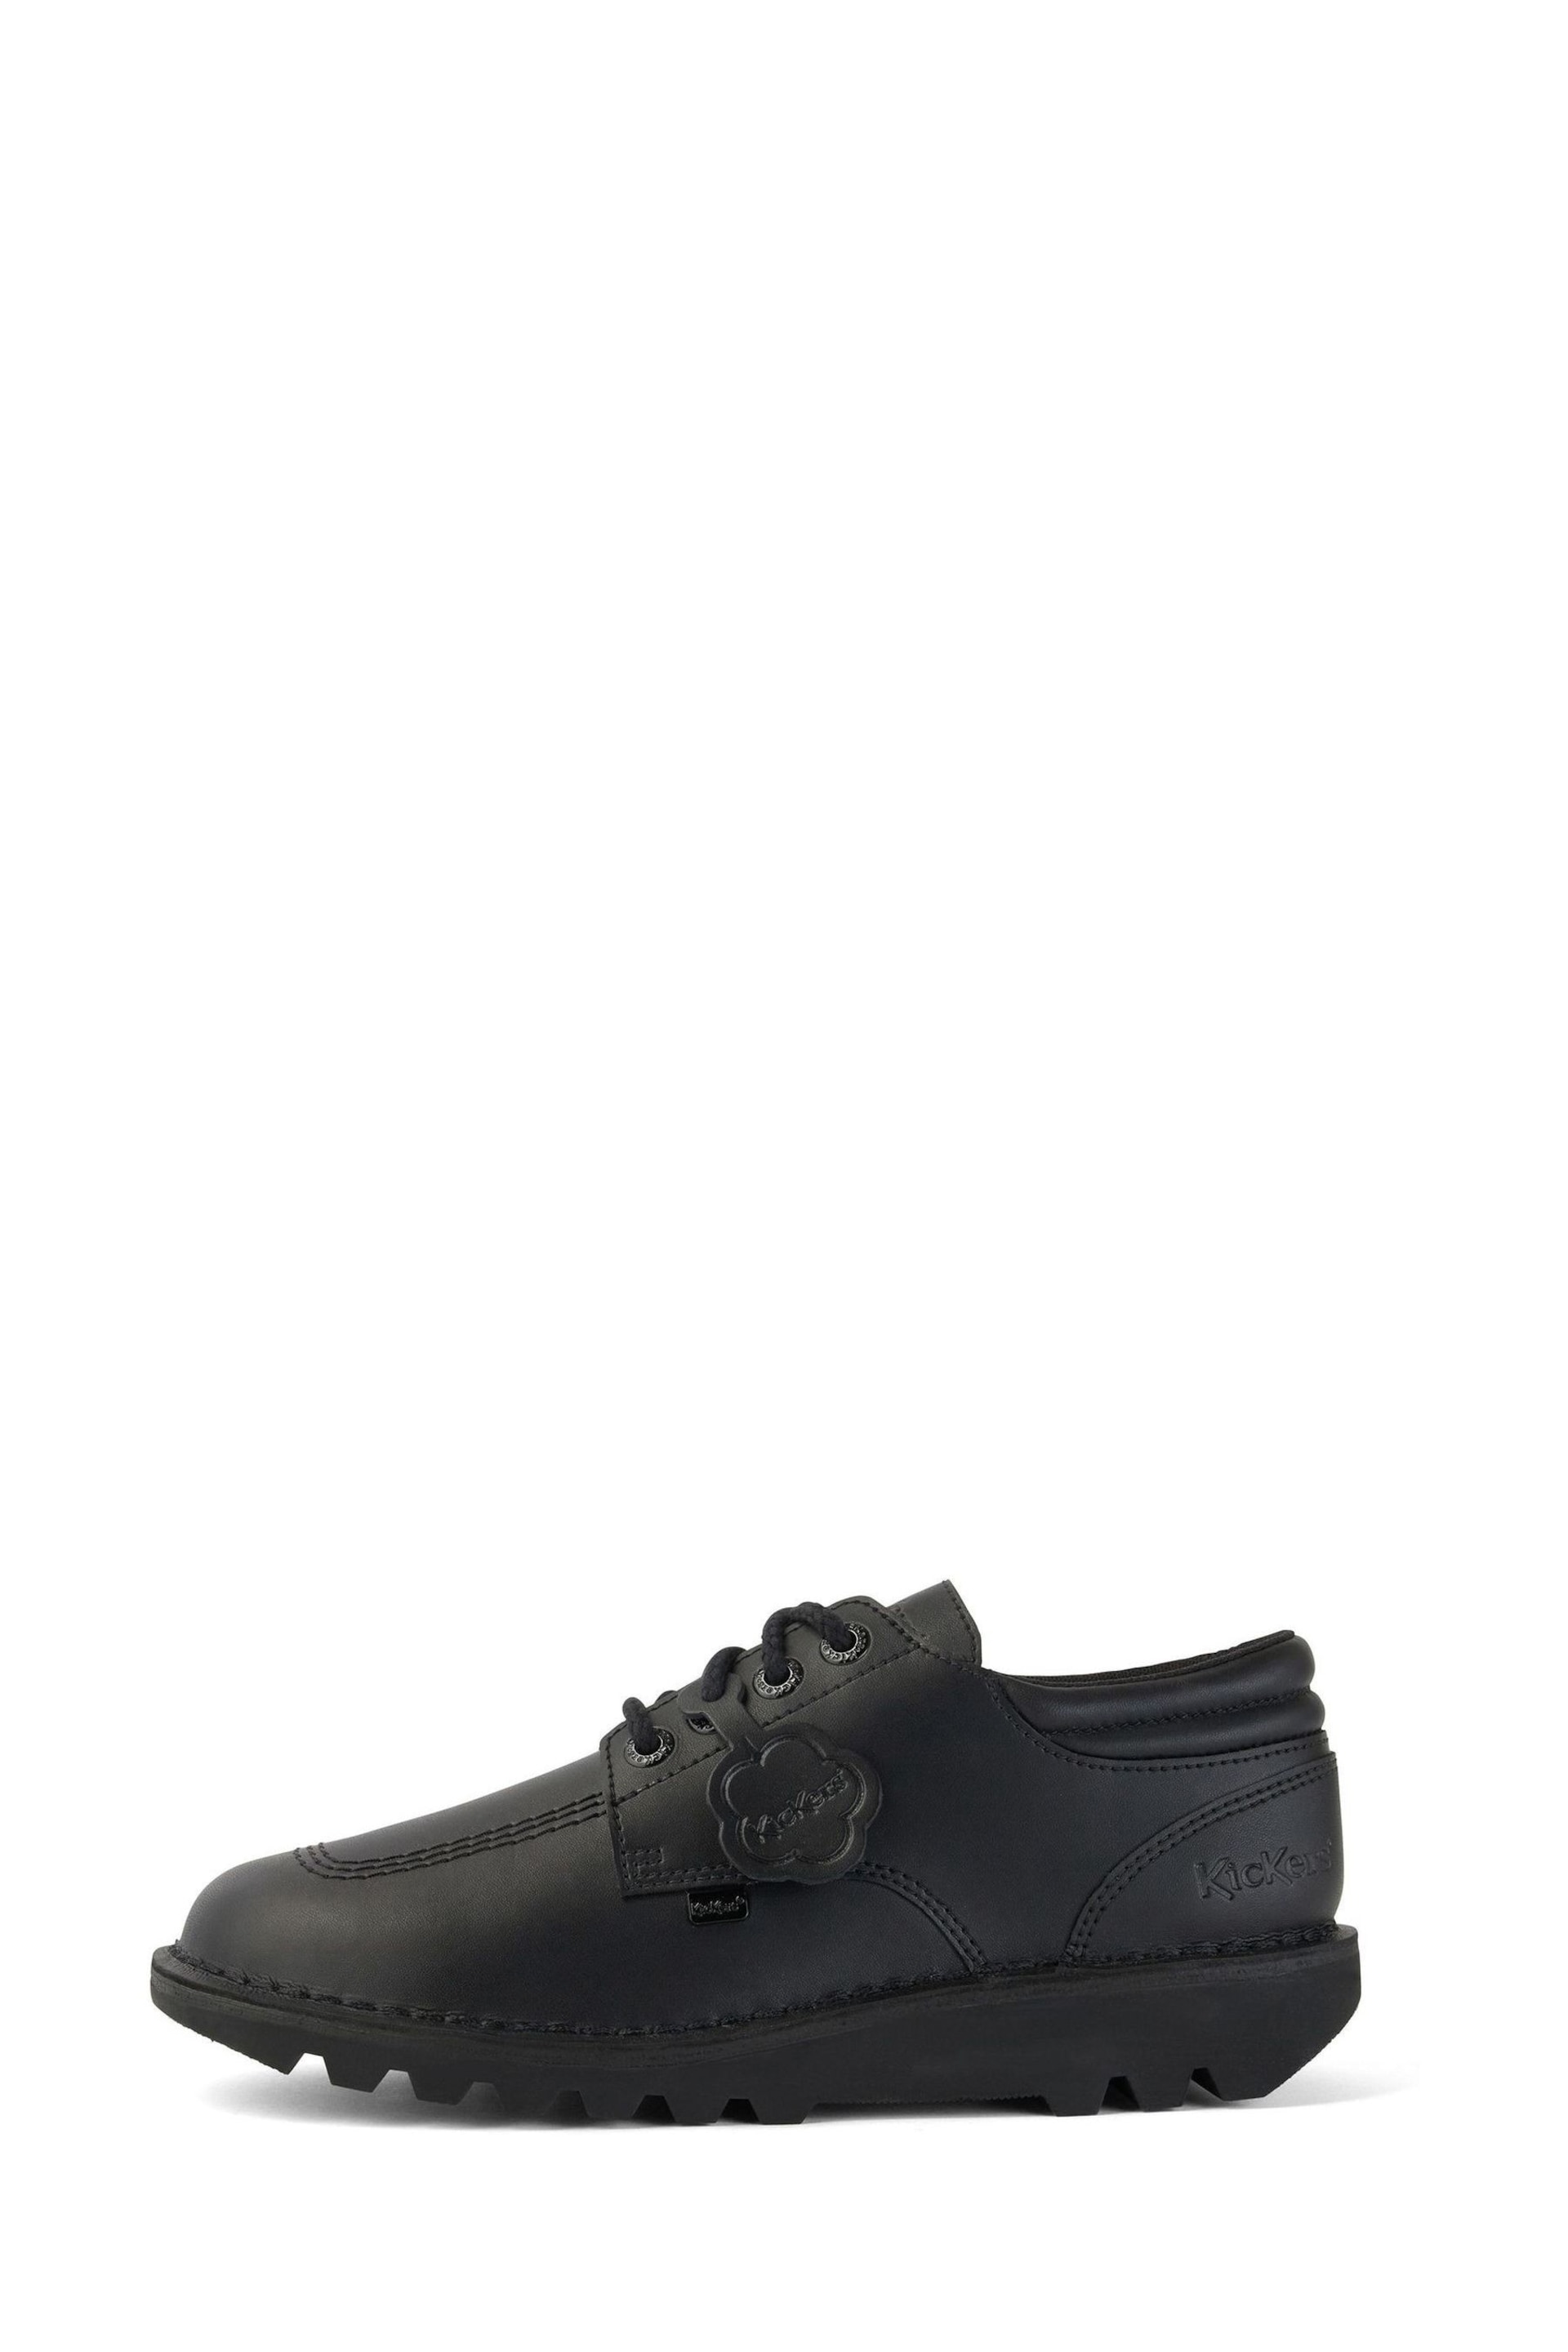 Kickers Kick Lo Padded Leather Shoes - Image 1 of 6